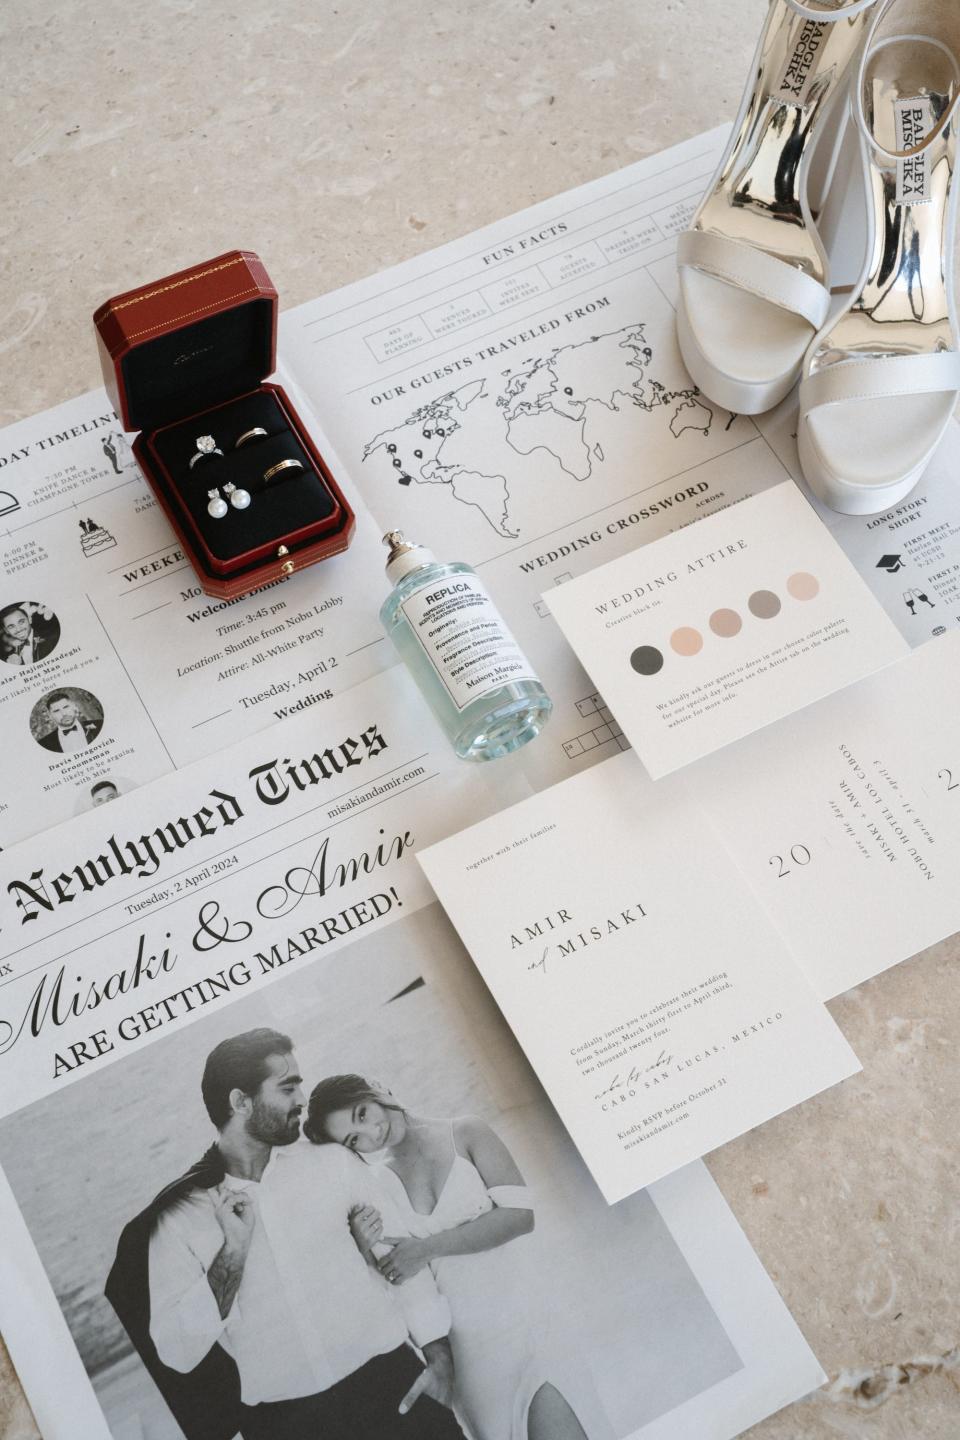 A suite of wedding invitations, shoes, and a wedding ring box sit atop a newspaper spread.